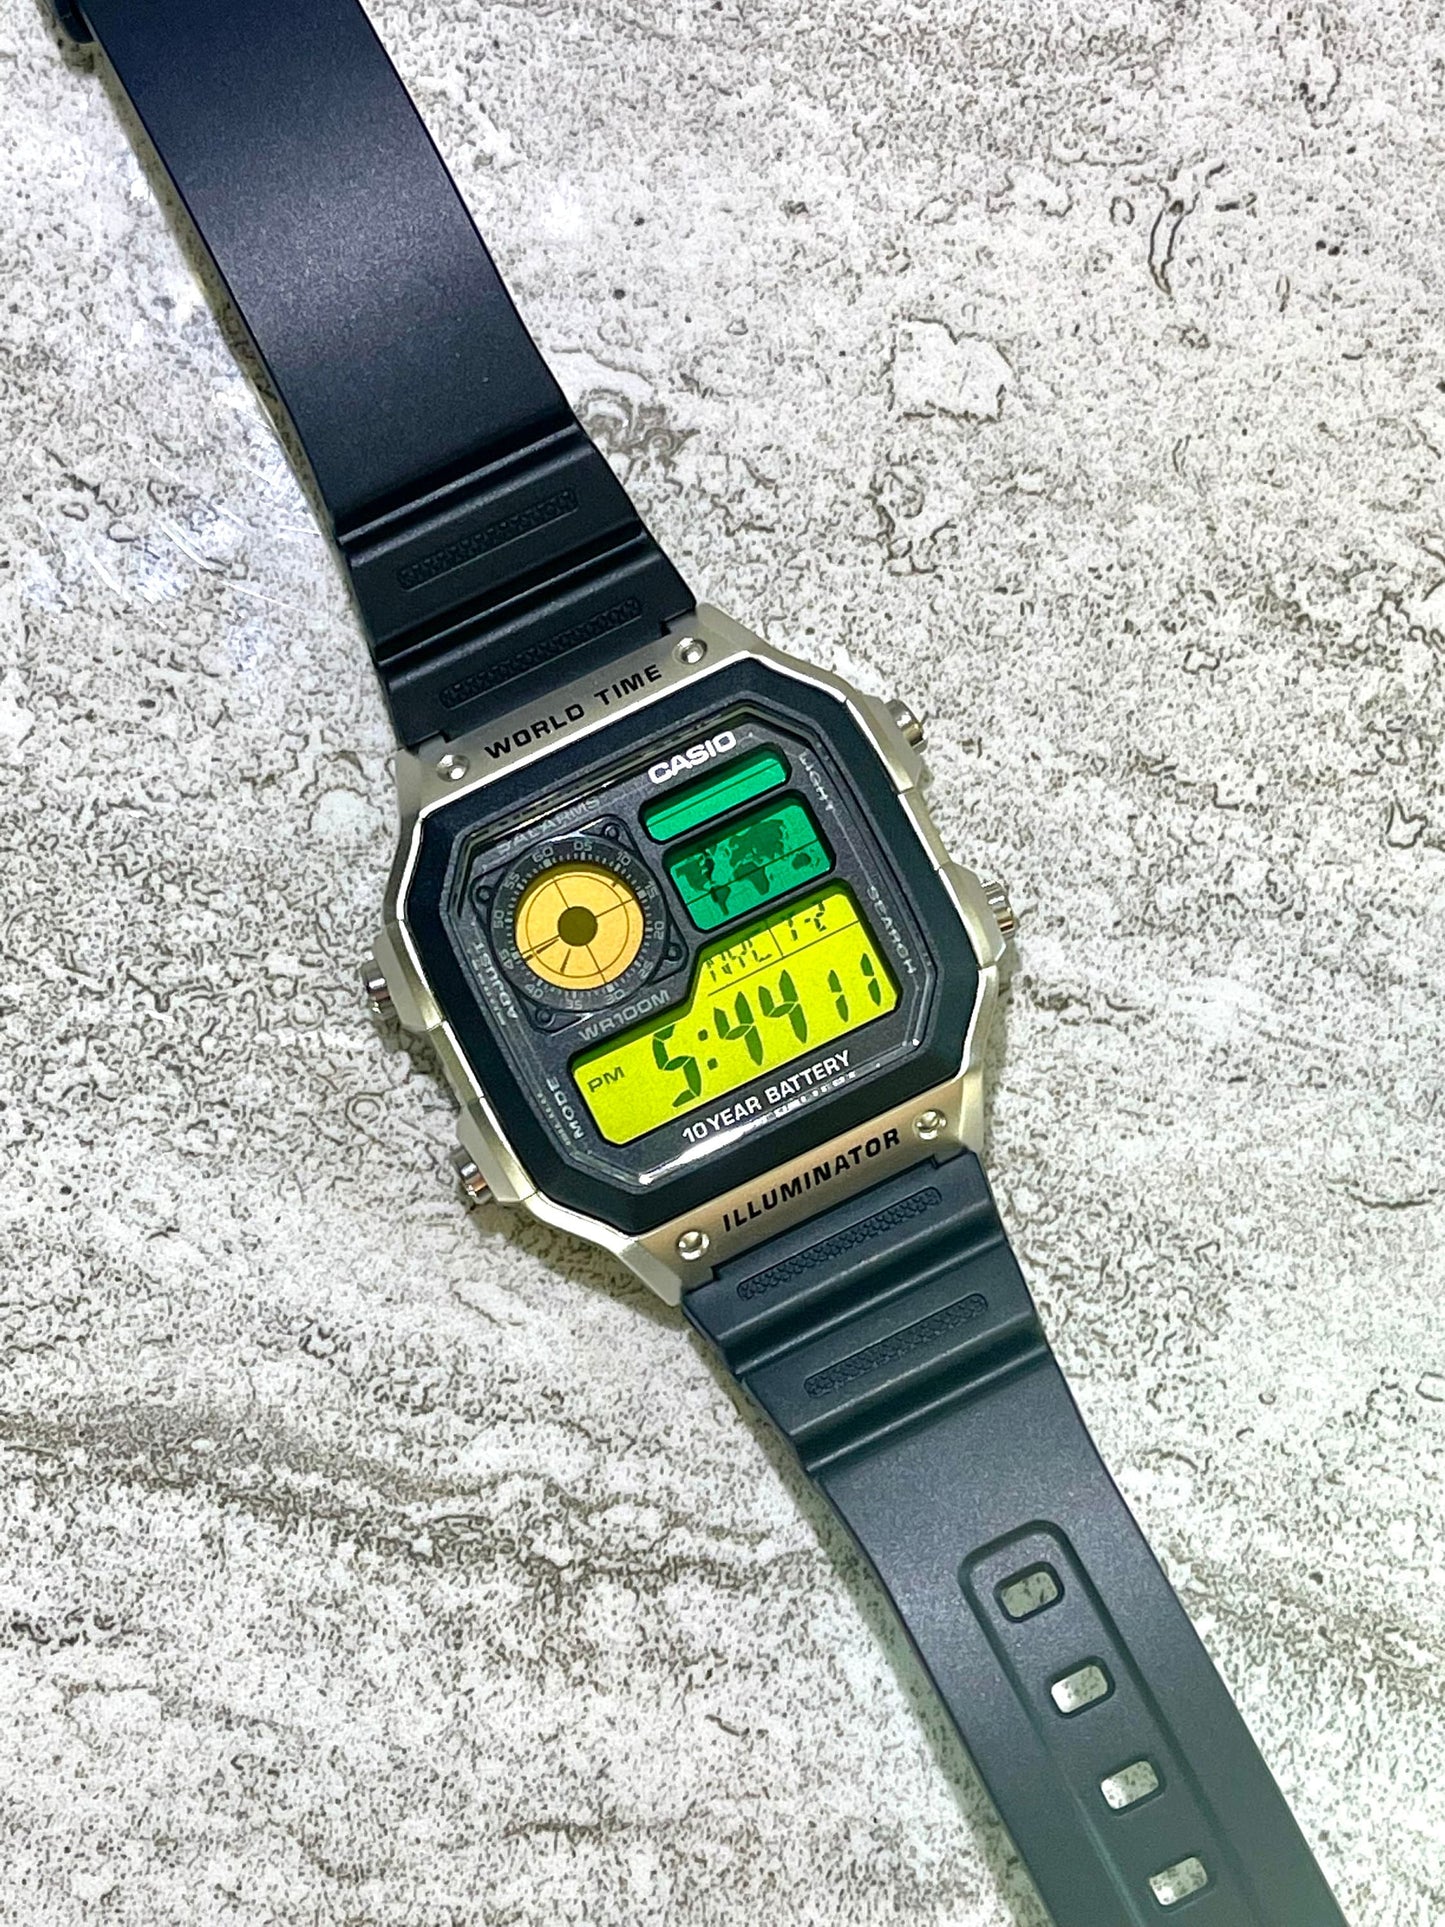 Custom Silver Casio World Time Watch with Color Screen Mod (Pick your colors)